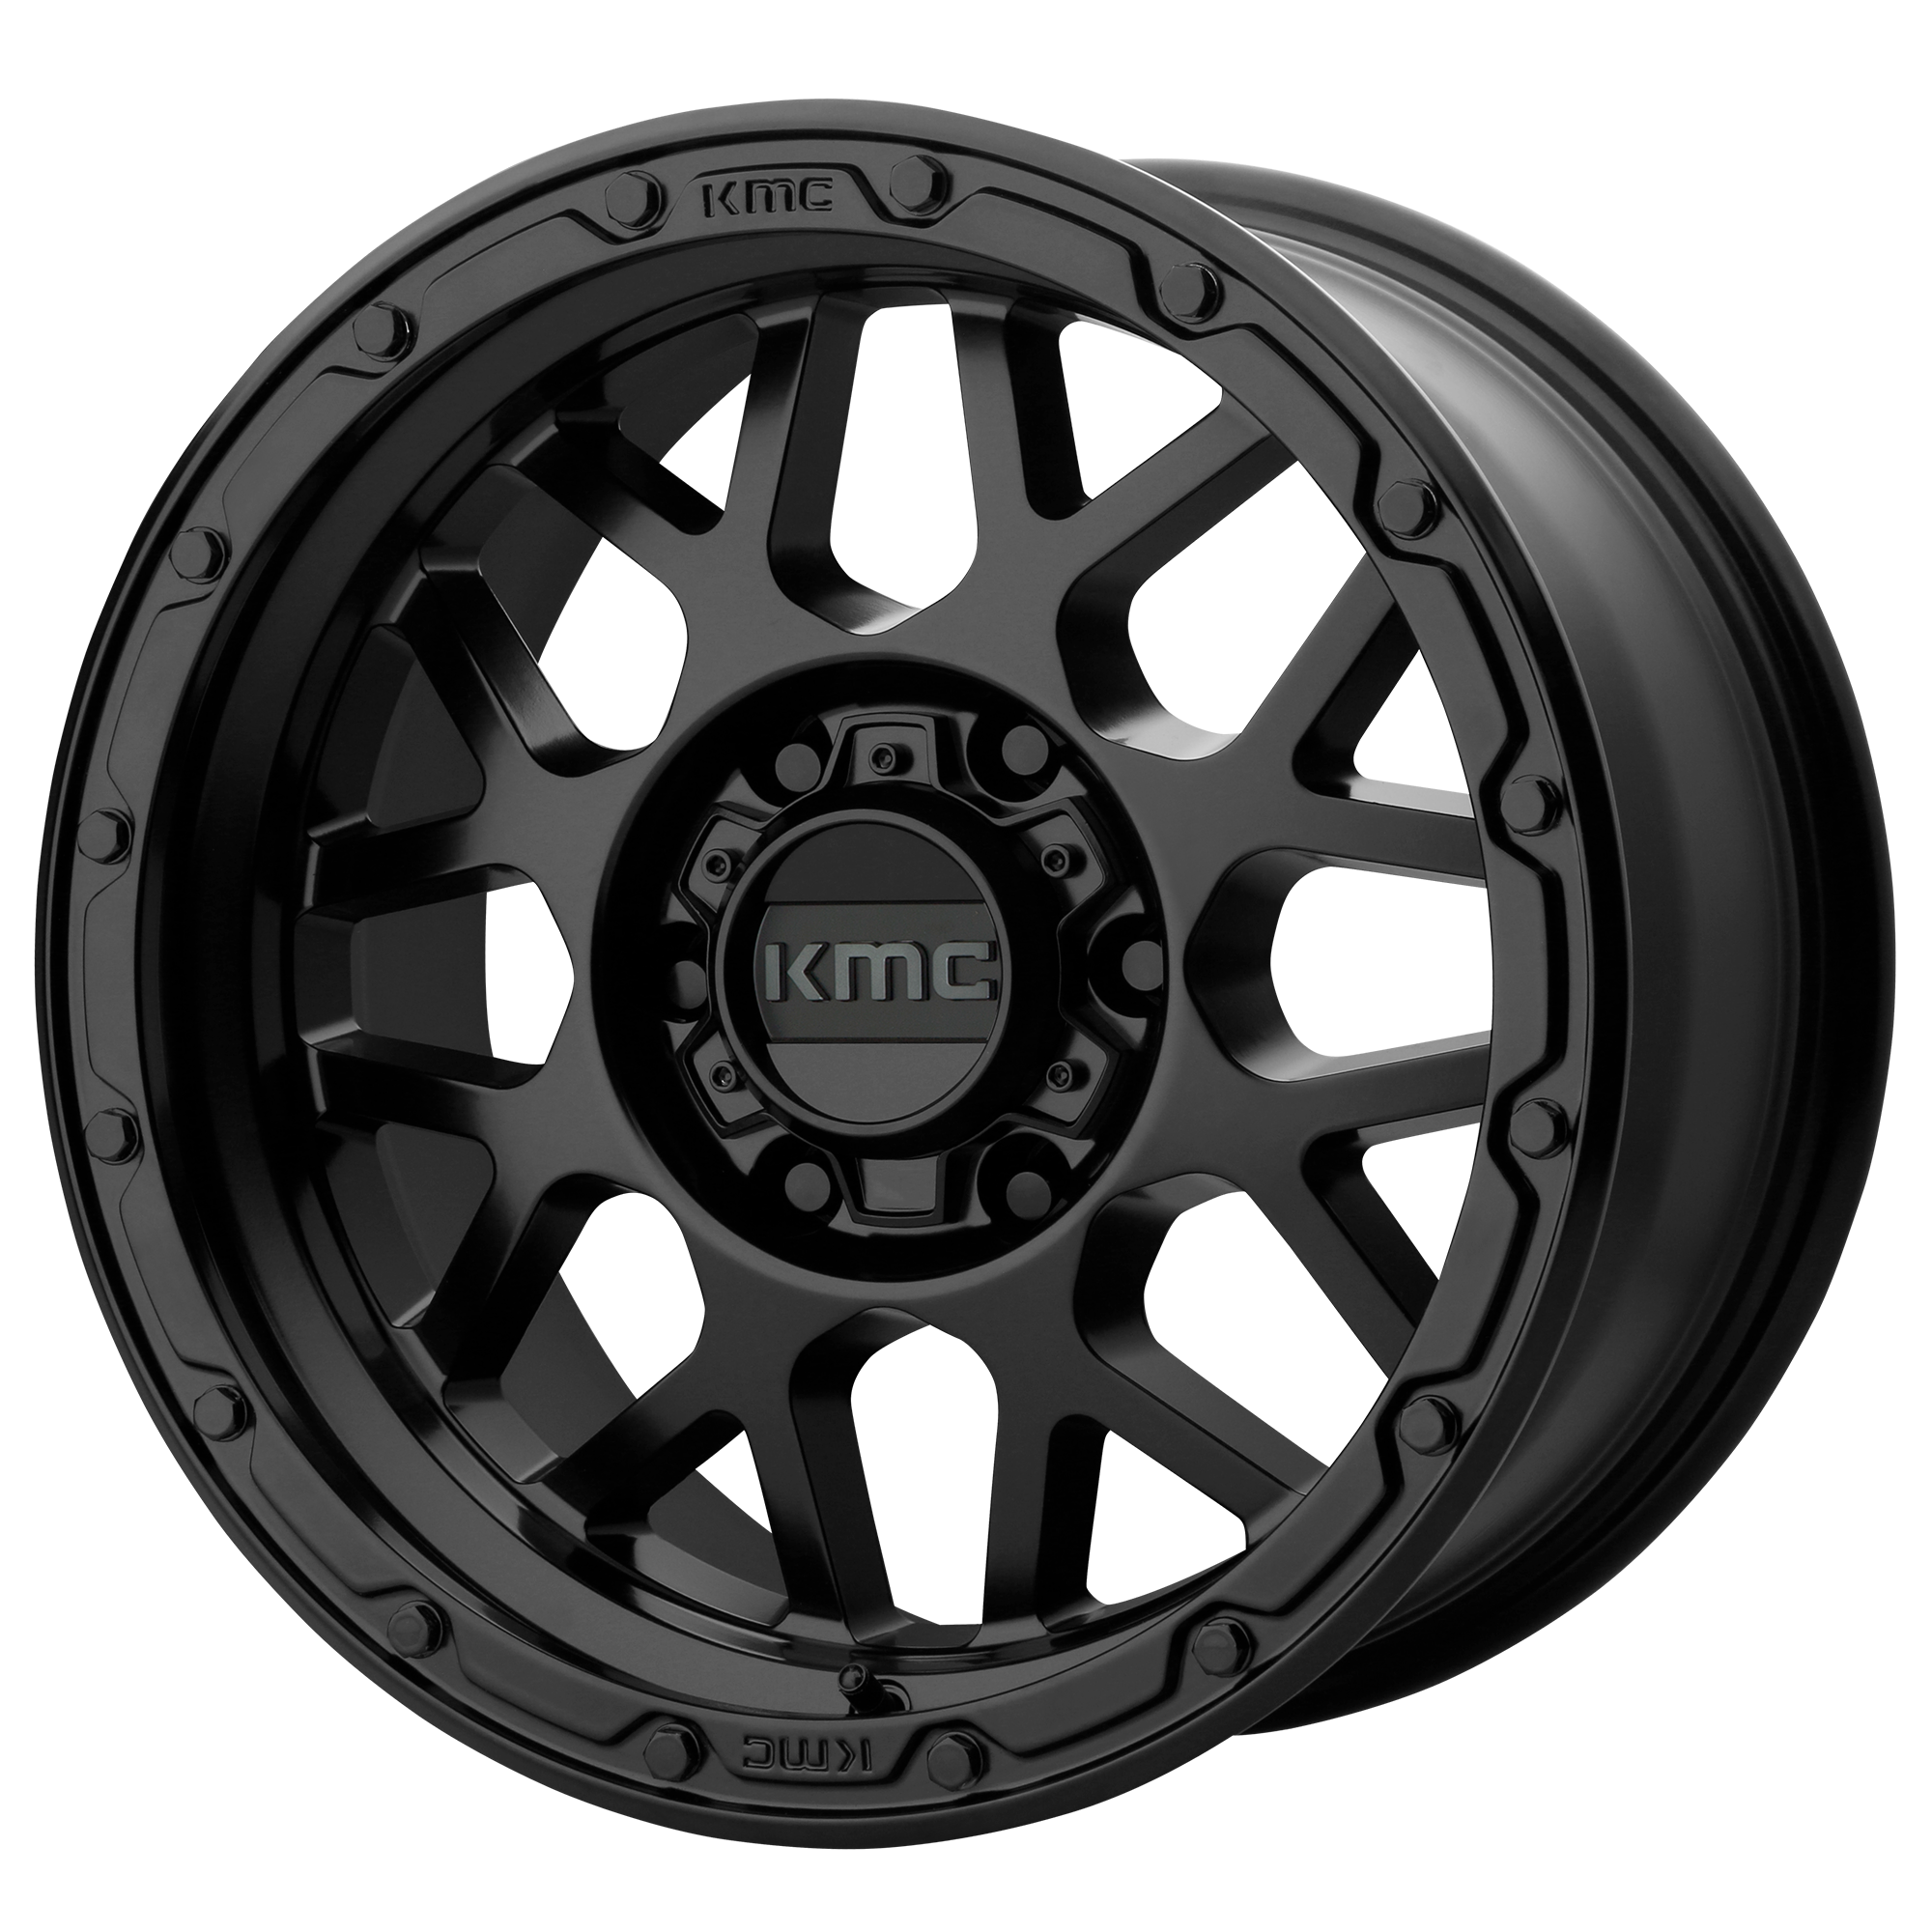 GRENADE OFF-ROAD 18x8.5 6x120.00 MATTE BLACK (0 mm) - Tires and Engine Performance